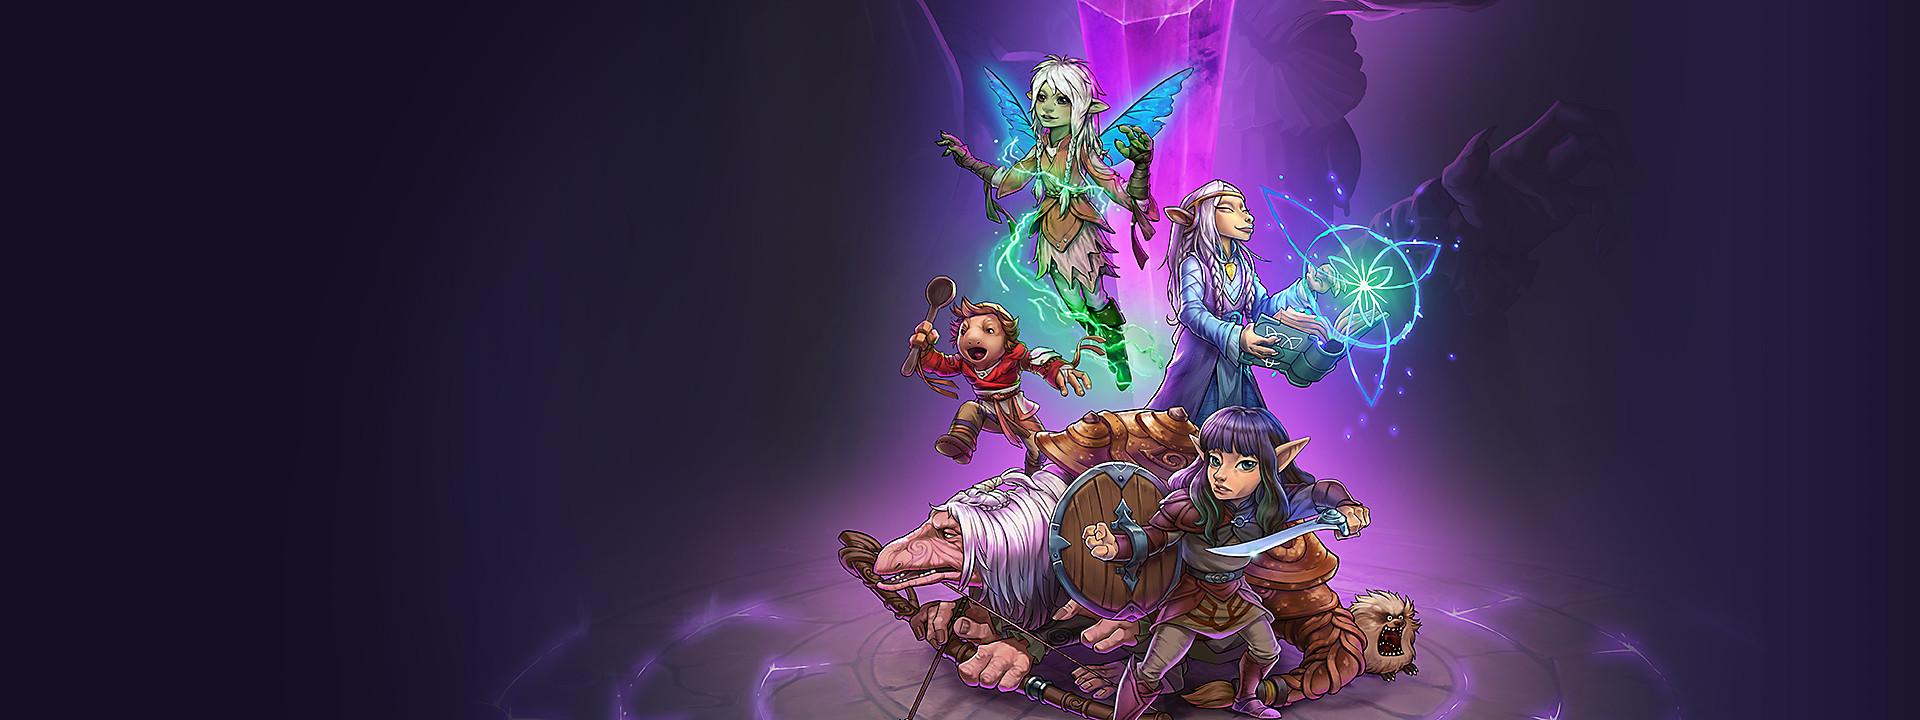 The Dark Crystal: Age of Resistance Tactics Game. PS4